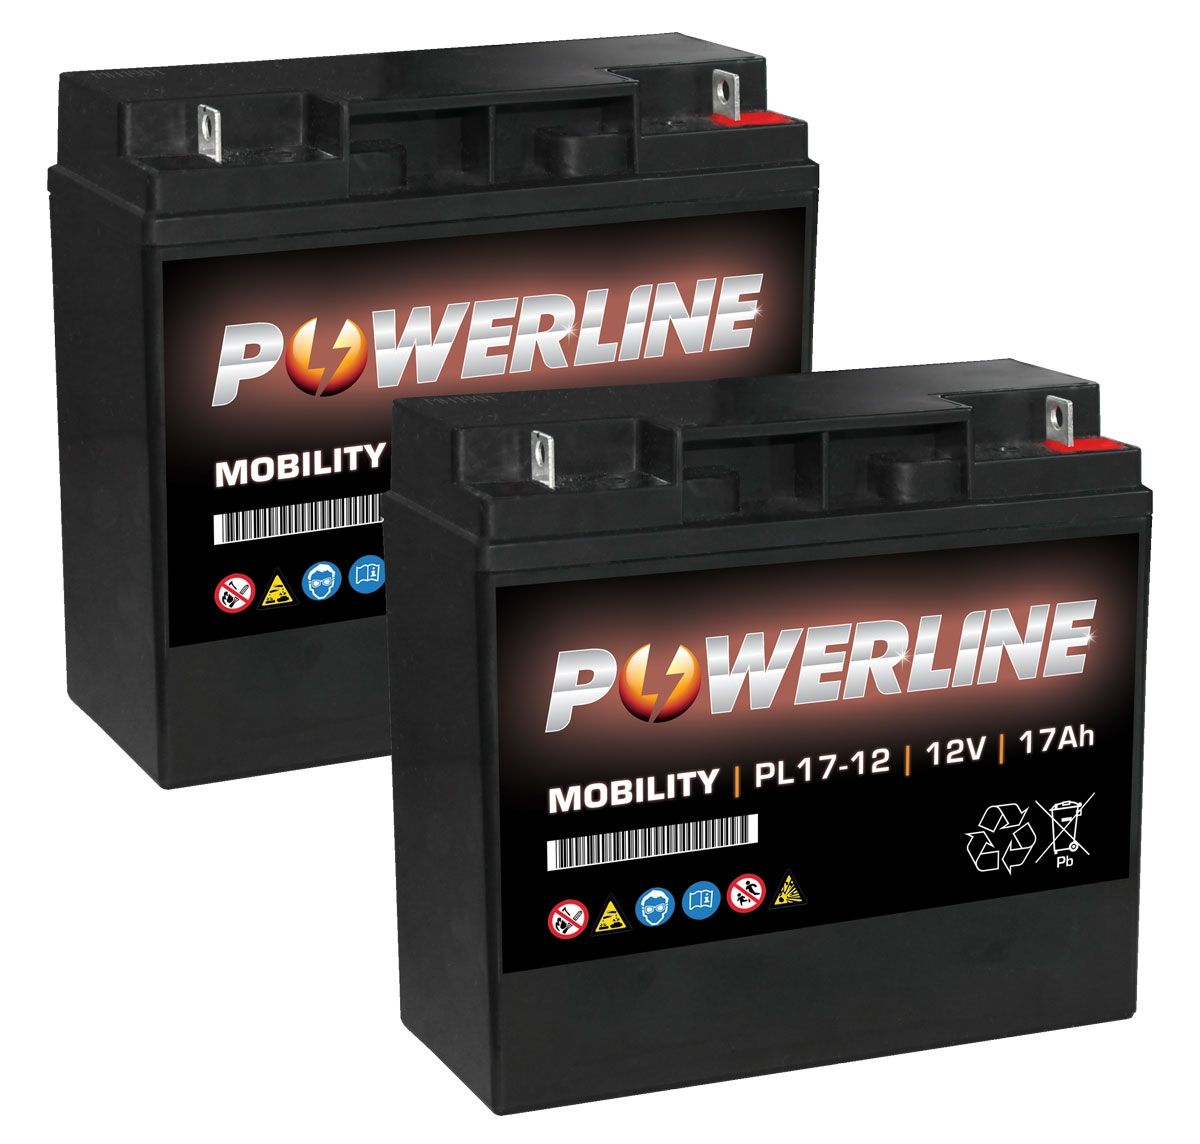 Pair Of Pl17 12 Powerline Mobility Battery 12v 17ah